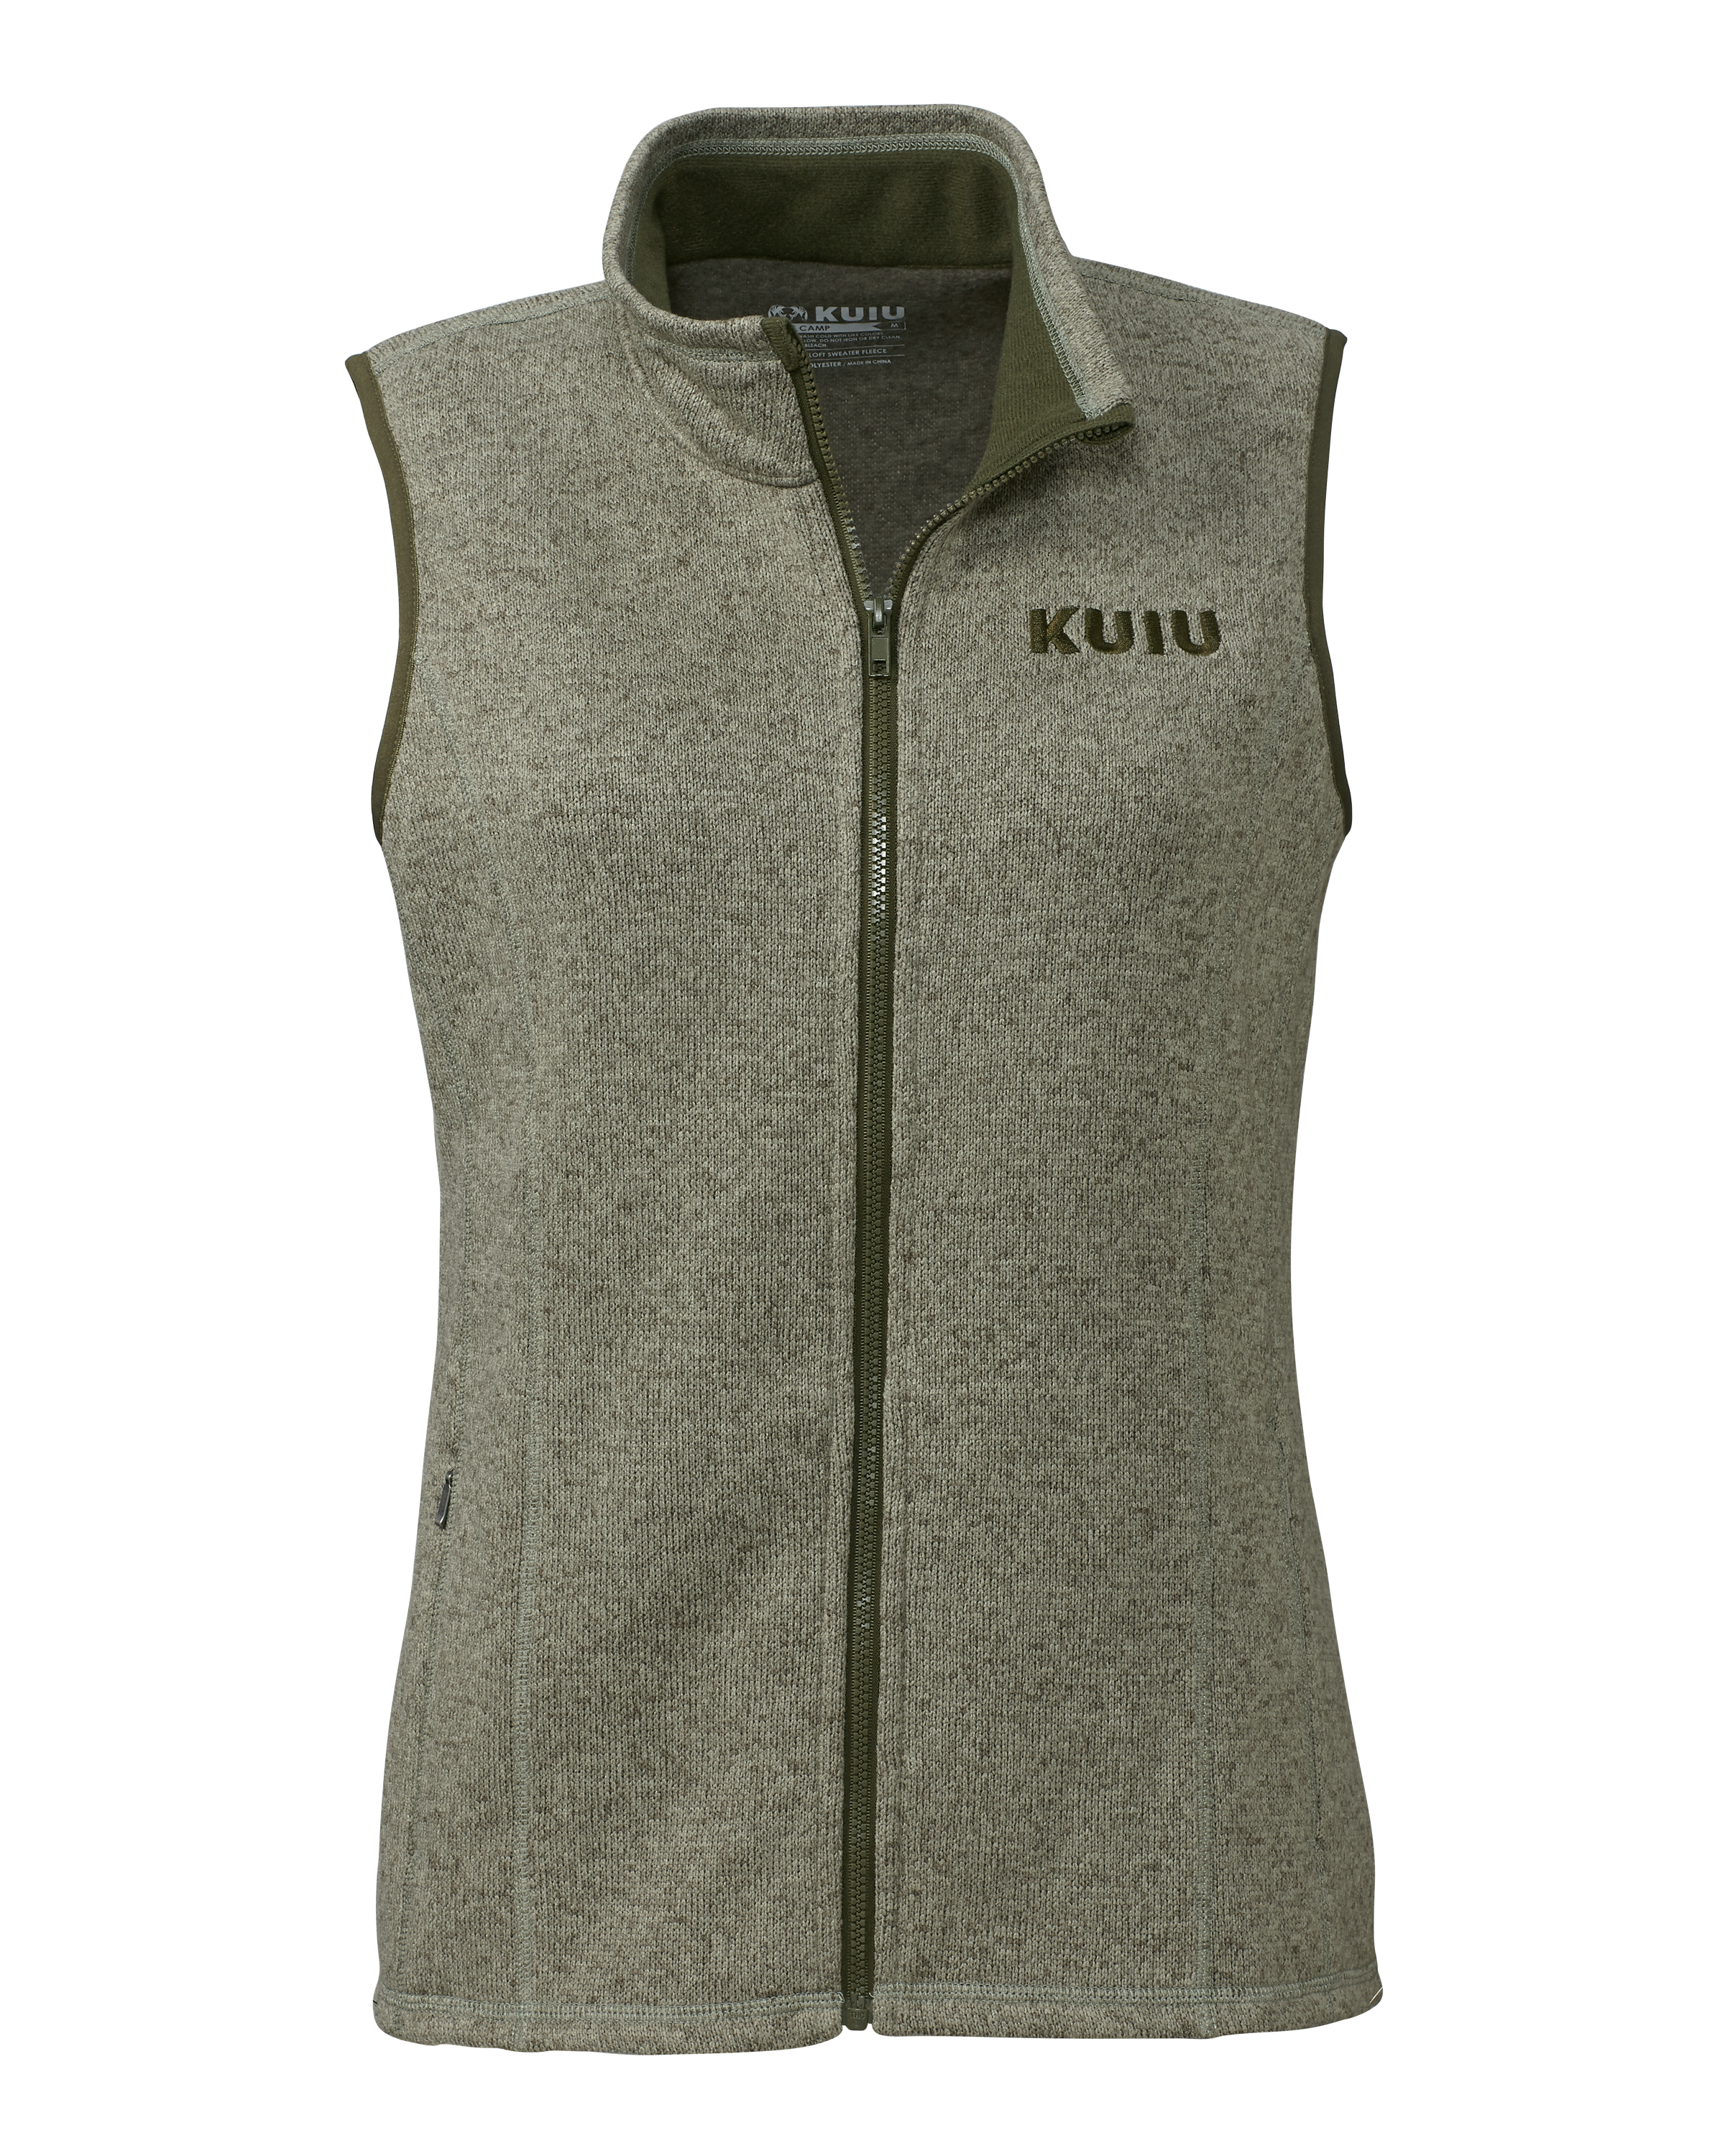 KUIU Outlet Women's Base Camp Sweater Vest in Heather Olive | Large